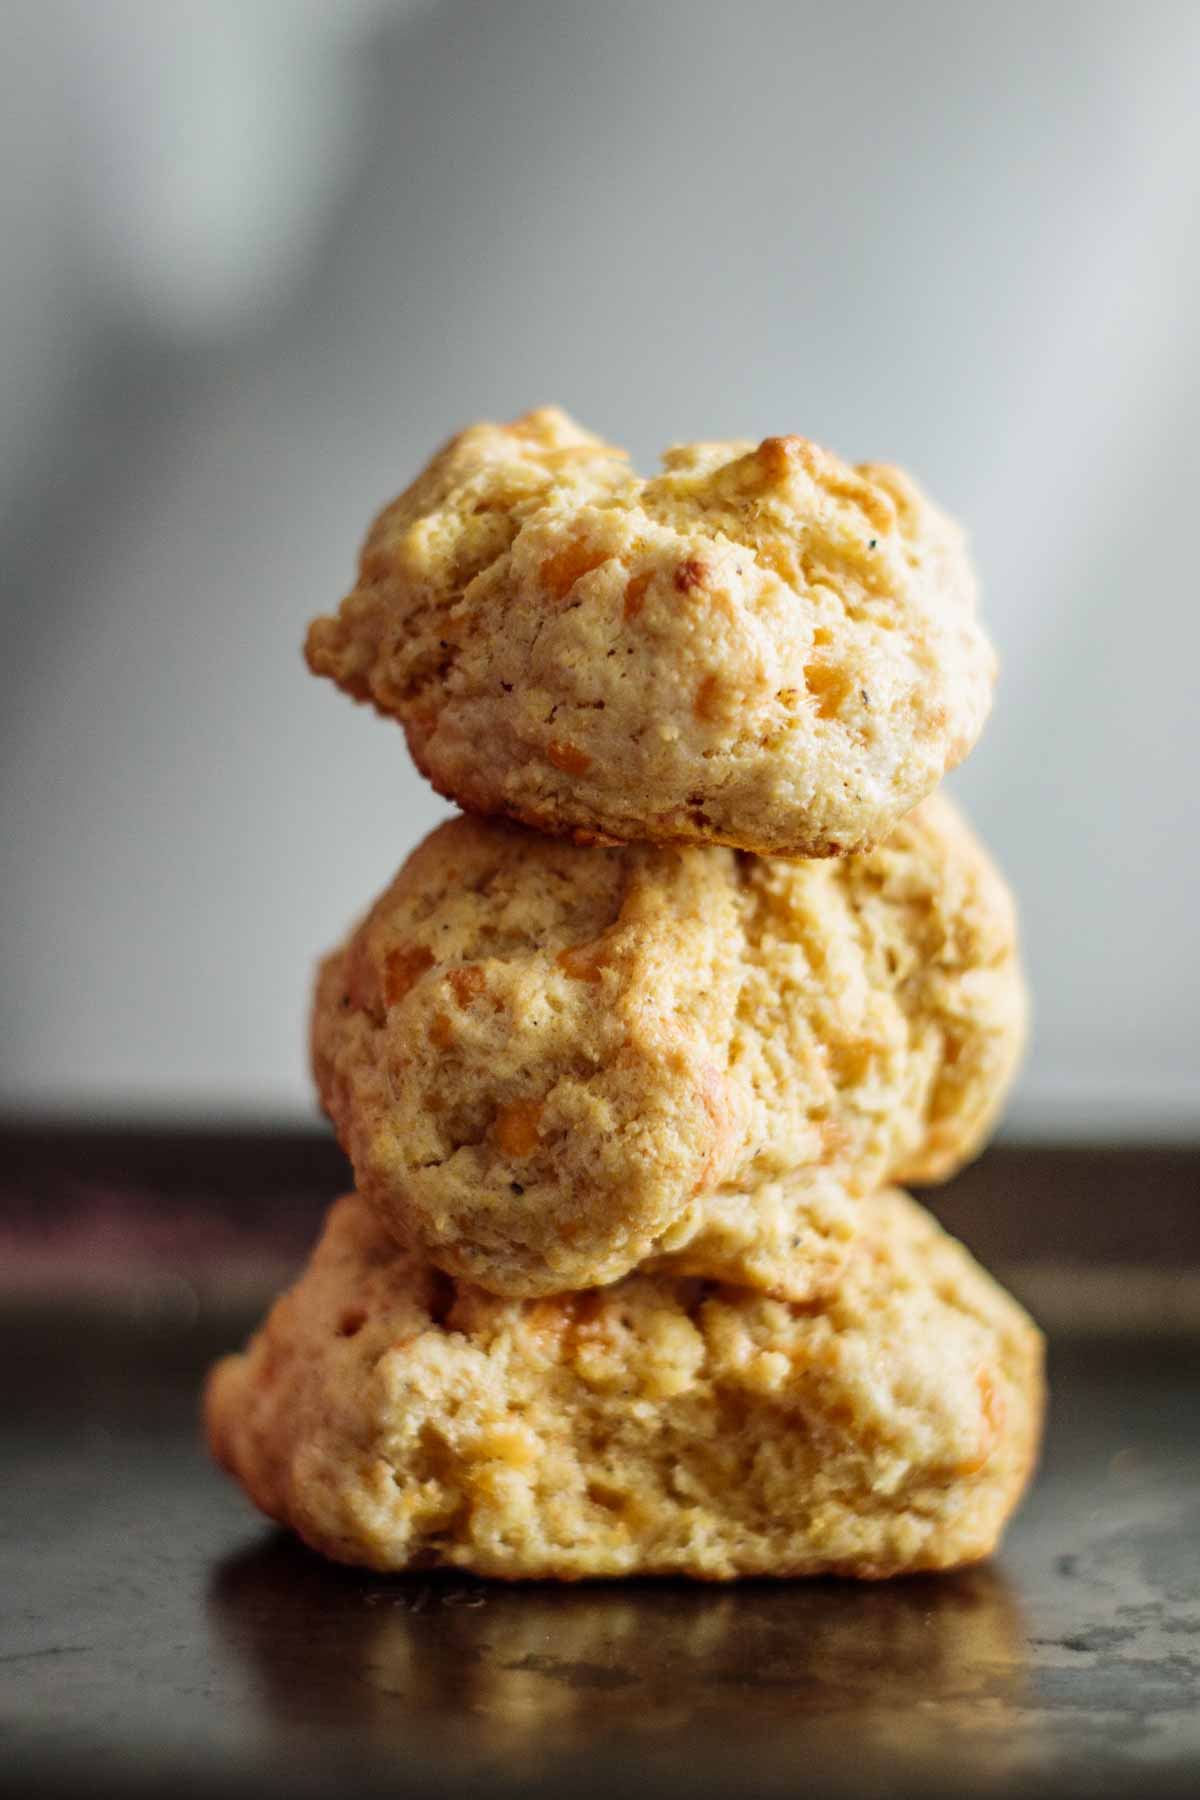 A stack of 3 cornmeal biscuits.